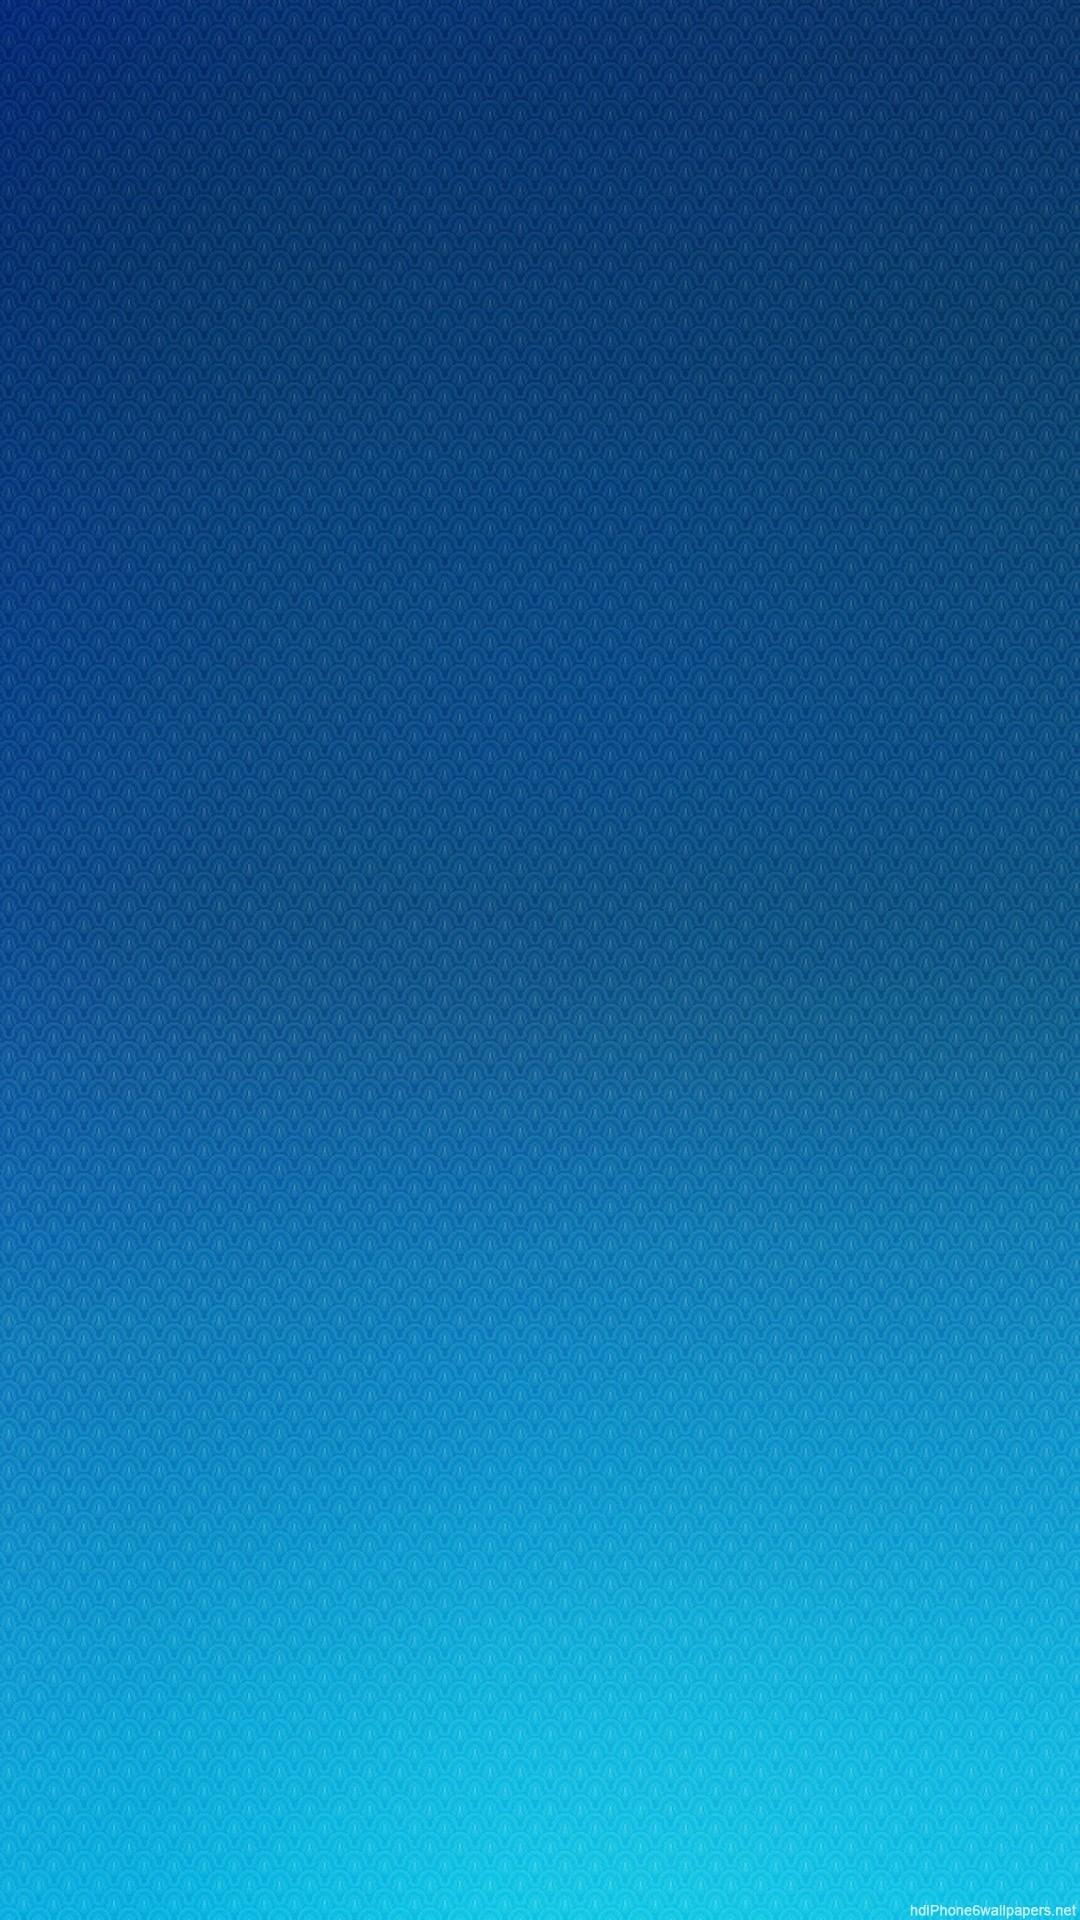 84+ Blue Iphone Wallpapers